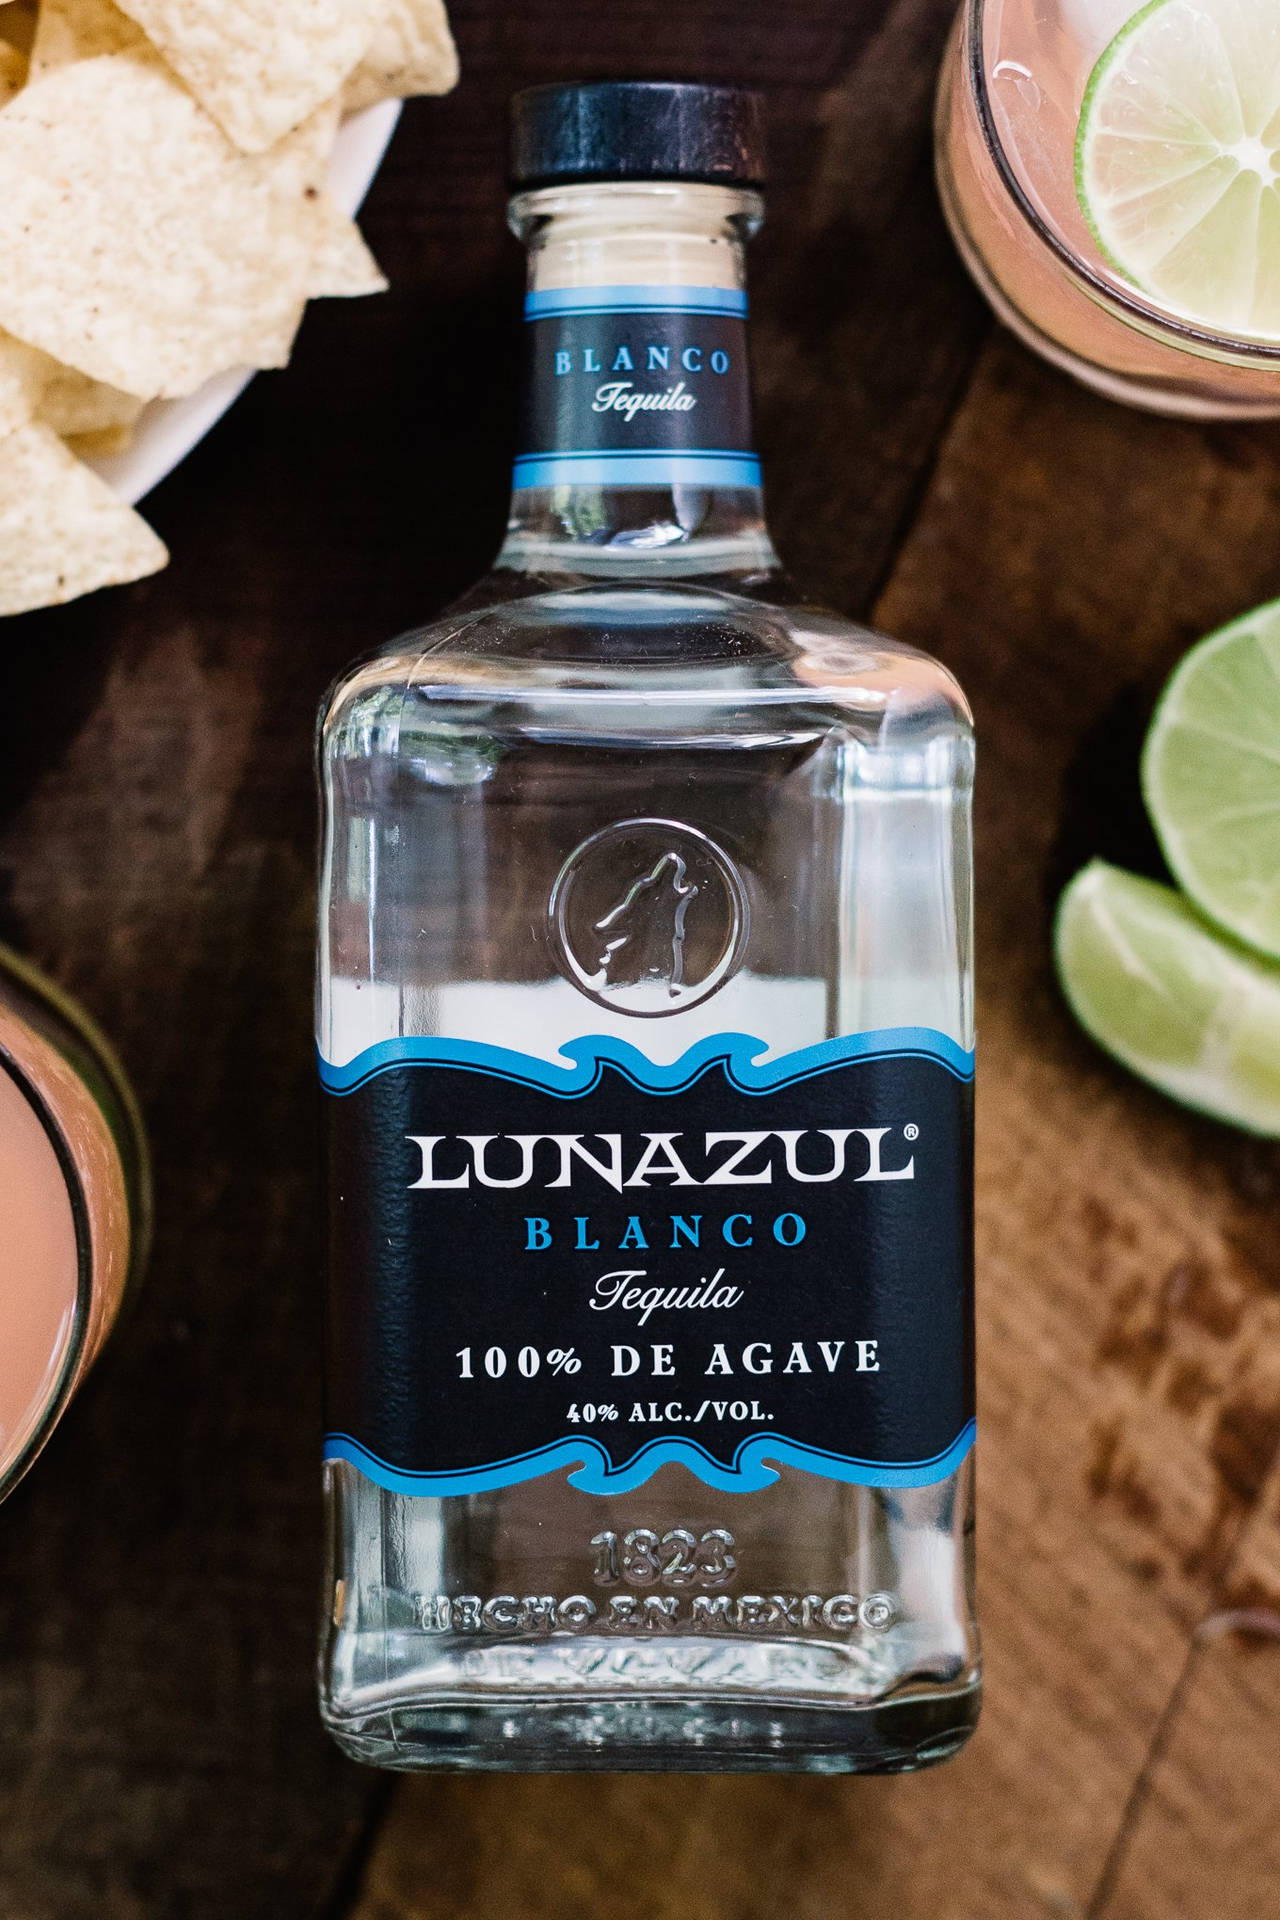 Sumptuous Lunazul Blanco Tequila served with juice and chips Wallpaper